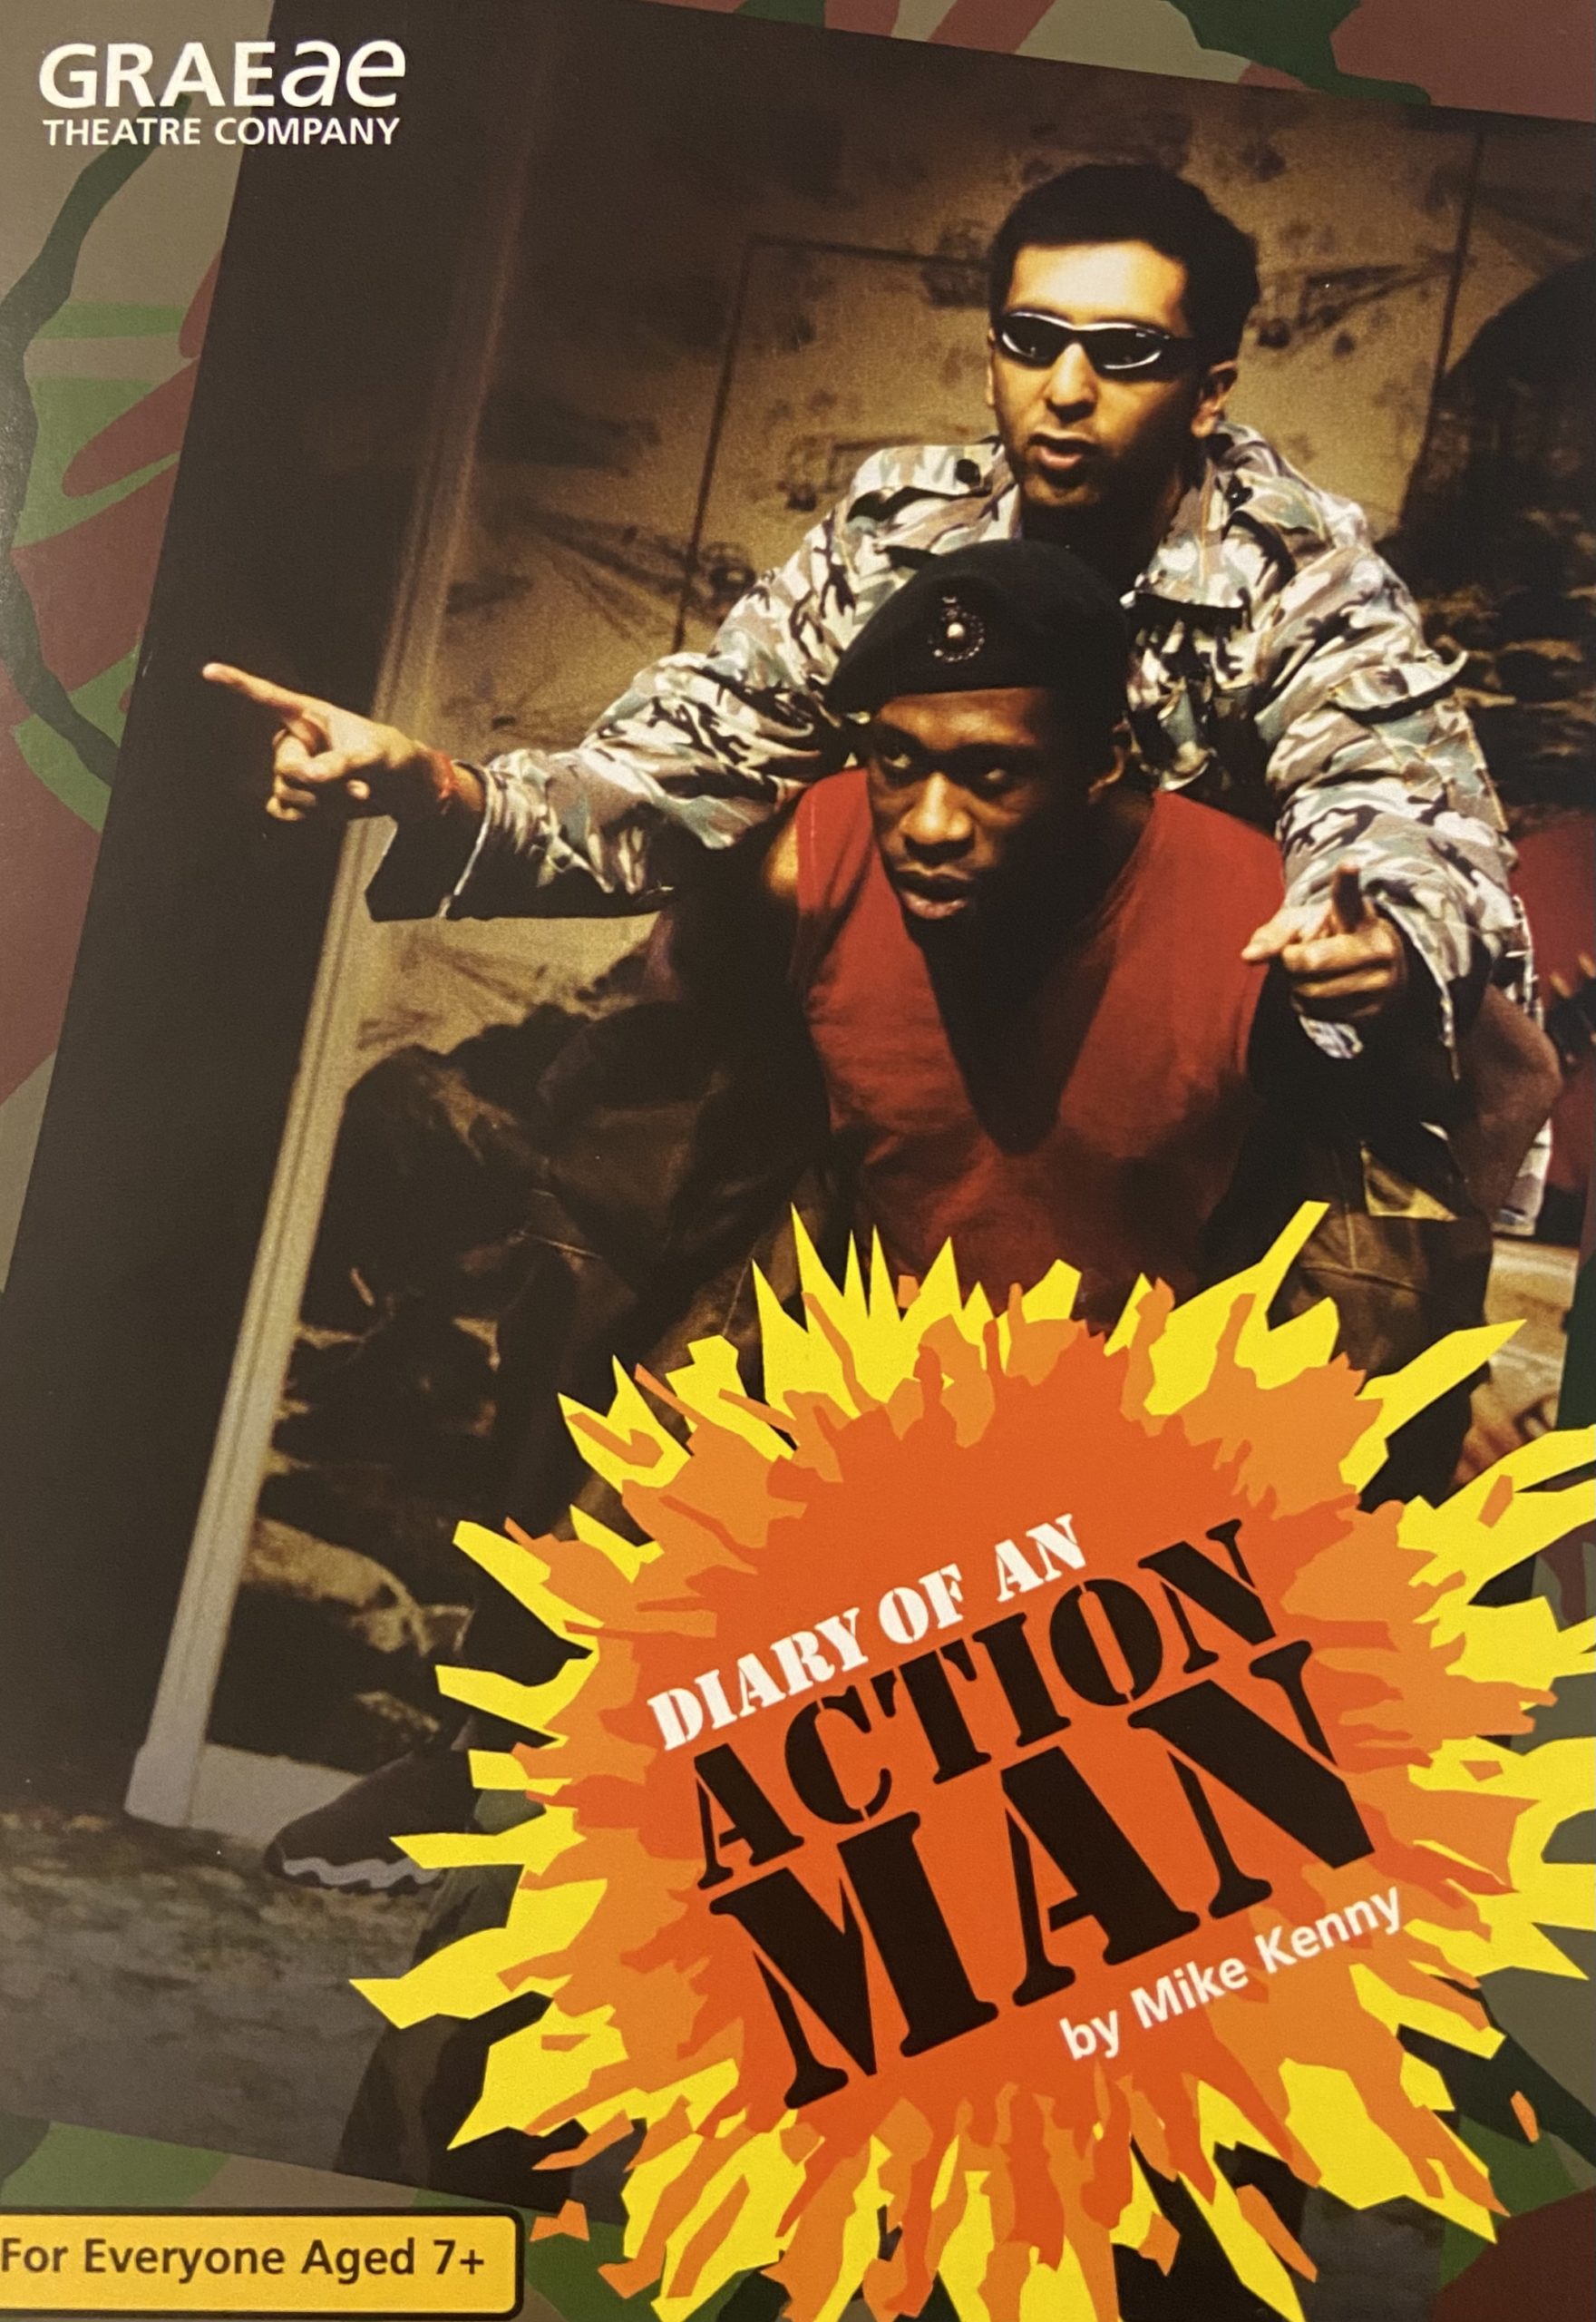 Poster for 'Diary of An Action Man'. It shows one man giving another man a piggy-back, the title of the show is written in a cartoon looking explosion.